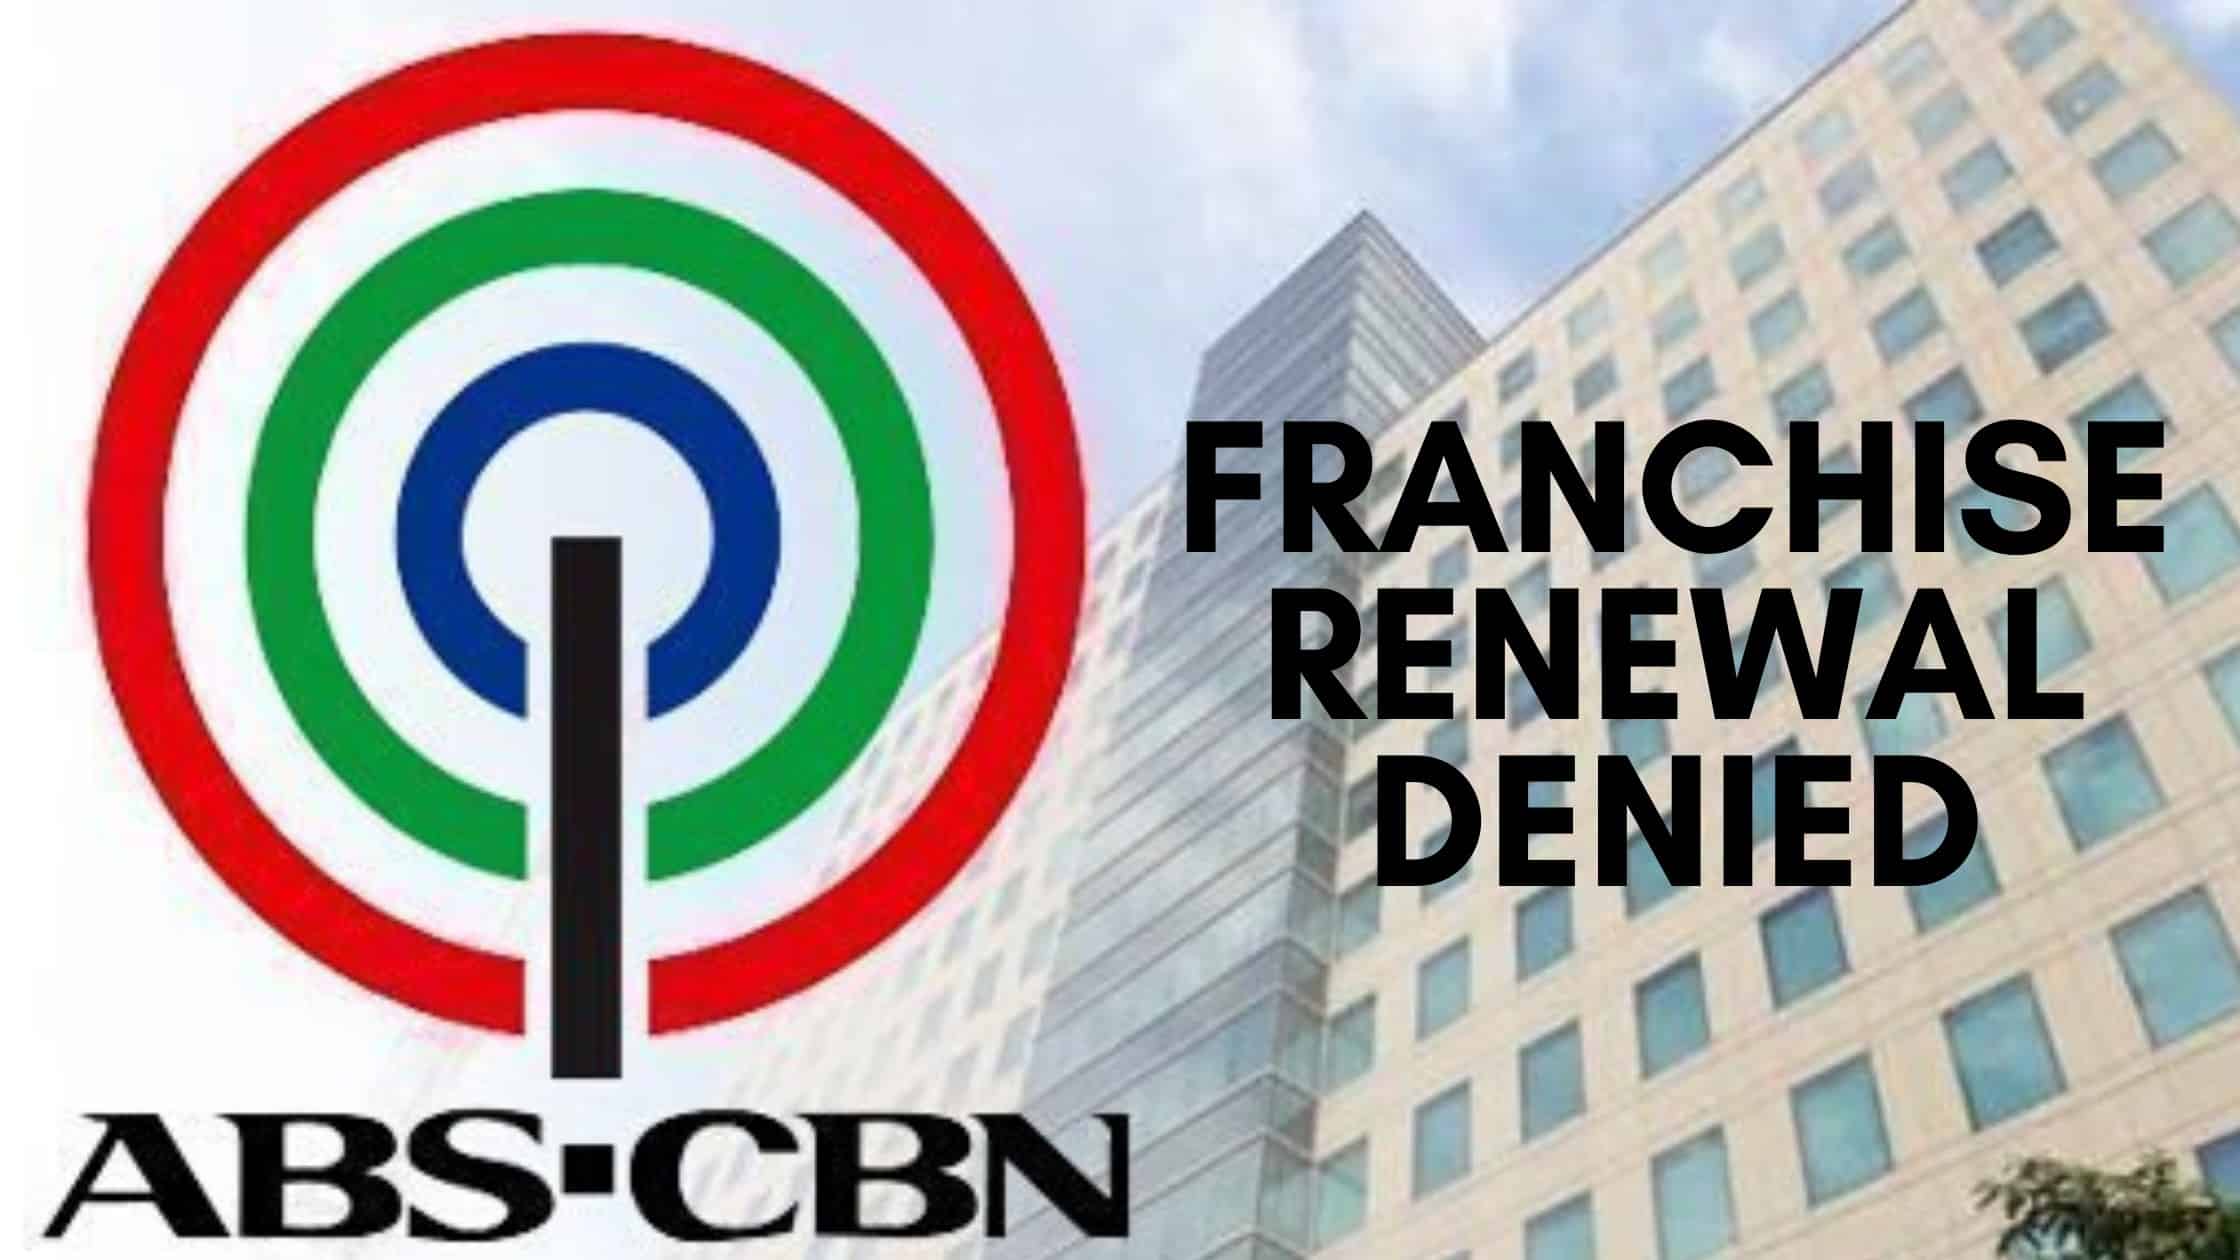 BREAKING NEWS: ABS-CBN's franchise renewal denied in a 70-11 vote.